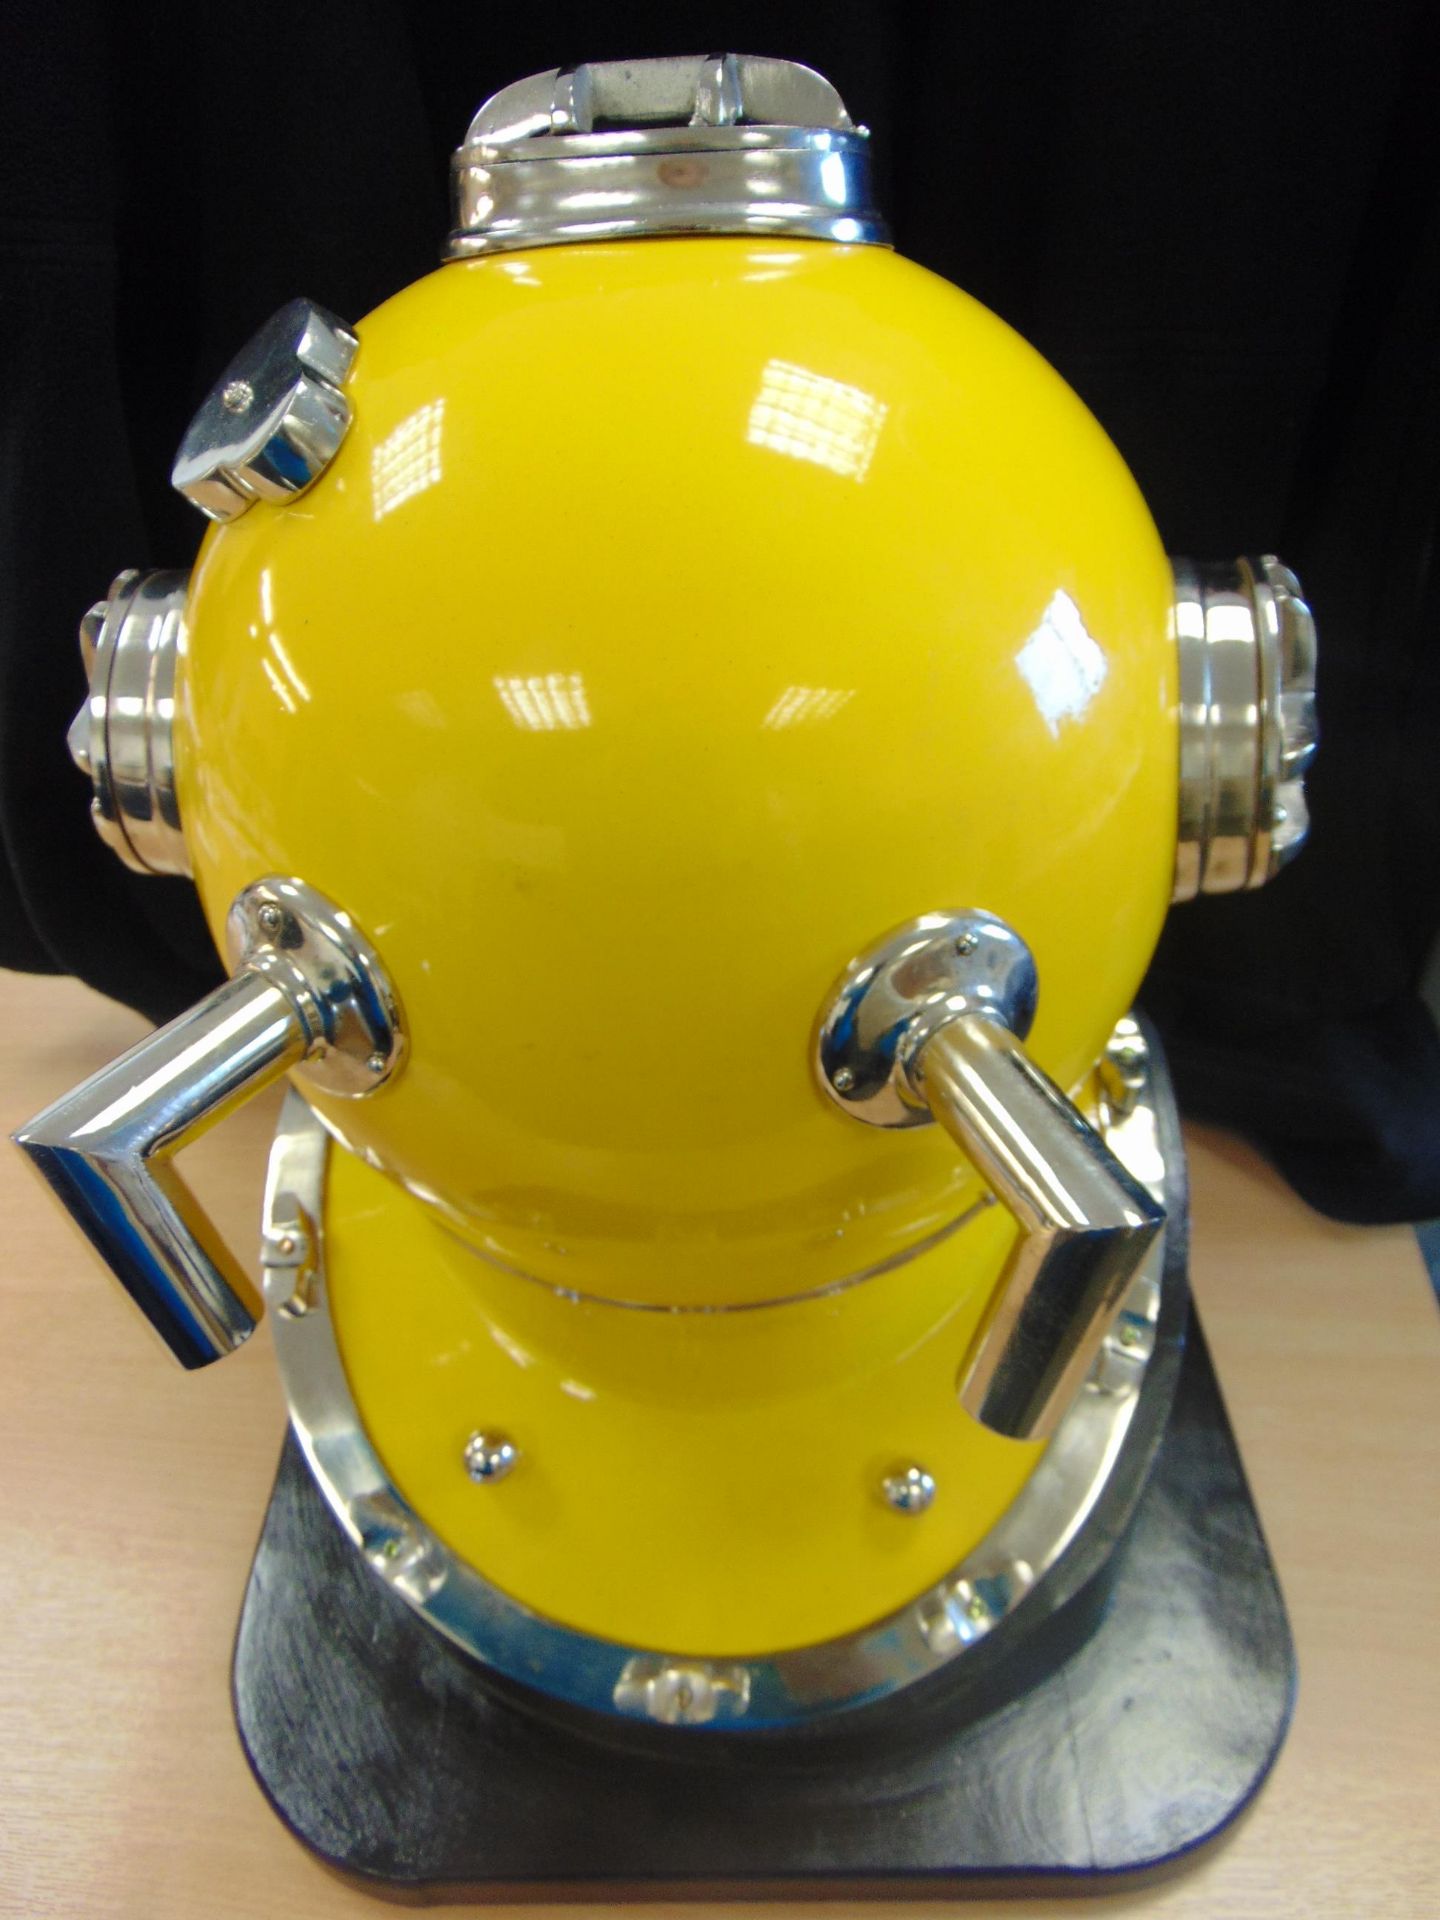 US NAVY MK 5 DIVING HELMET REPRO ON BASE 50 CMS X 40 CMS X 46 CMS - Image 3 of 7